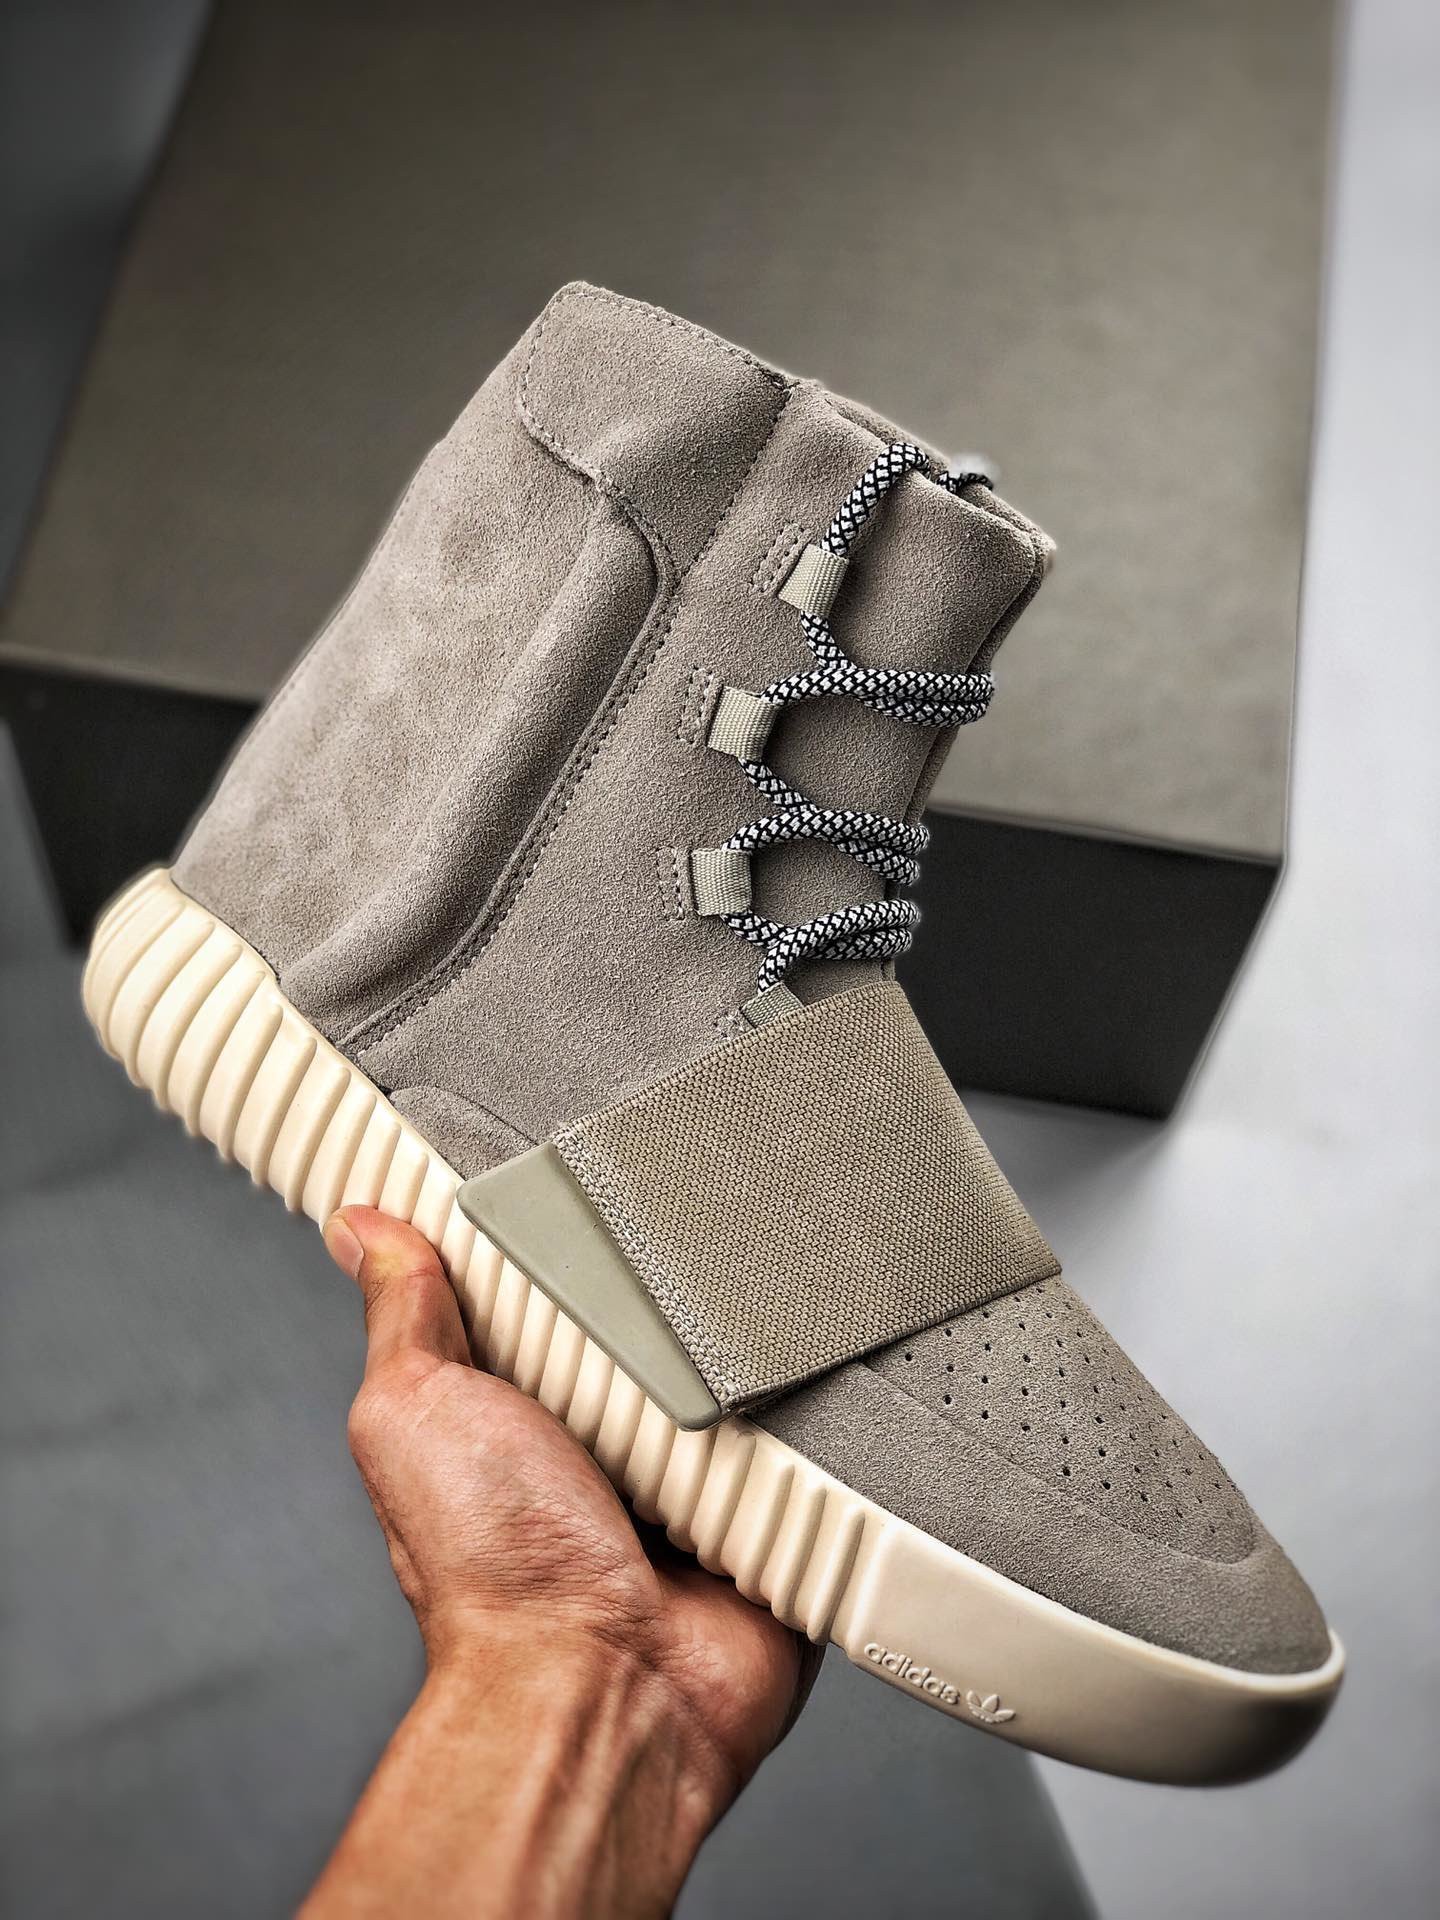 Adidas Yeezy 750 Boost Light Brown Carbon White B35309 For Sale